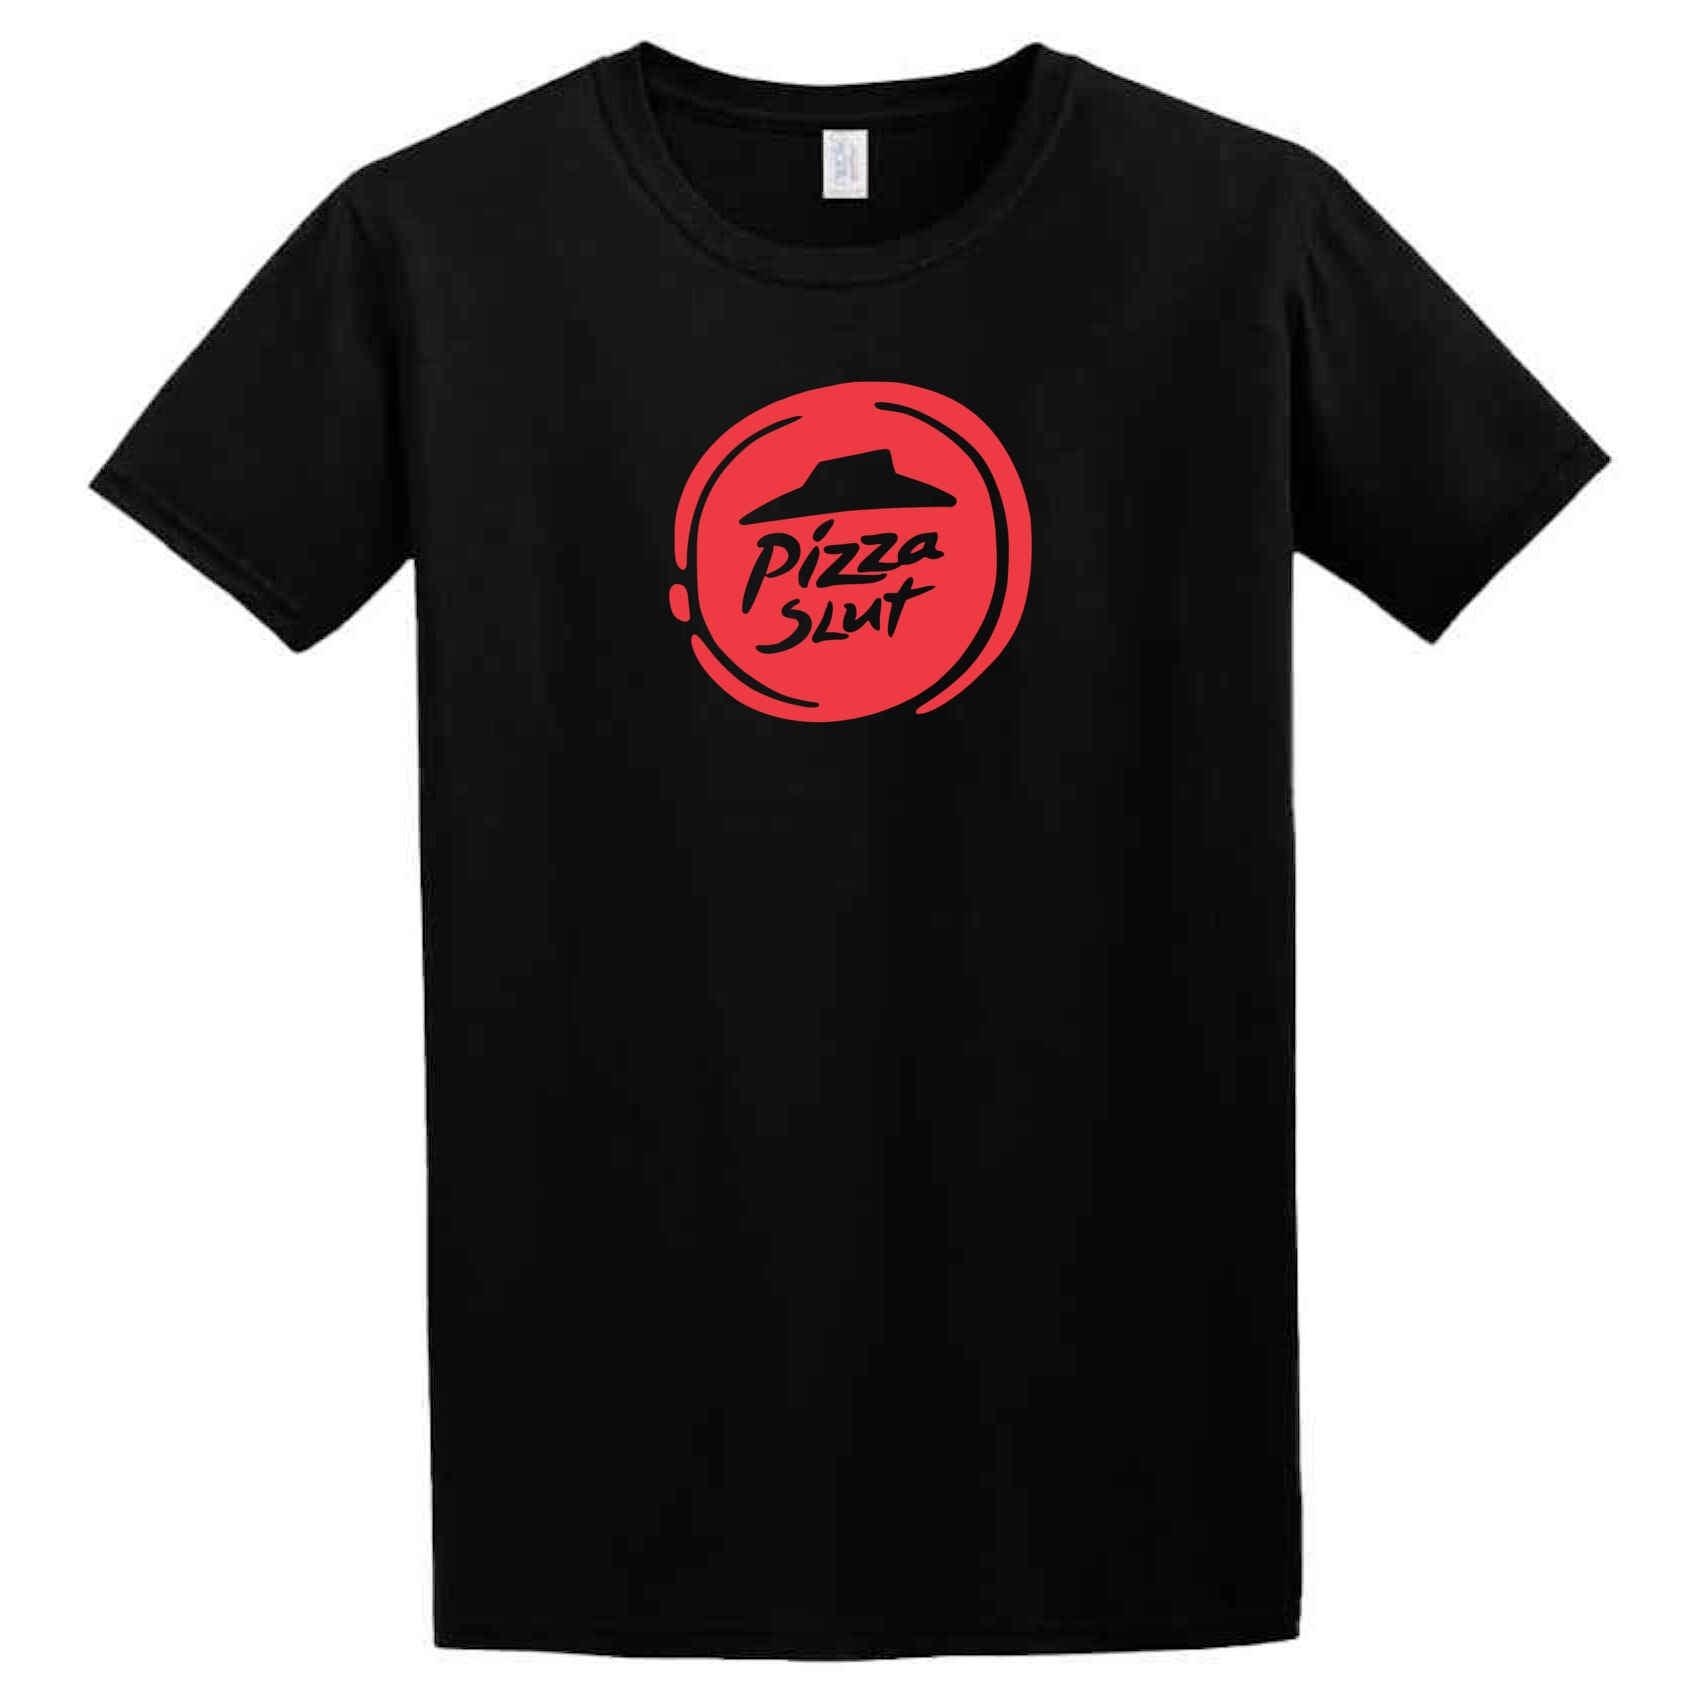 A Twisted Gifts Pizza Slut T-Shirt designed for those who have a love for pizza.